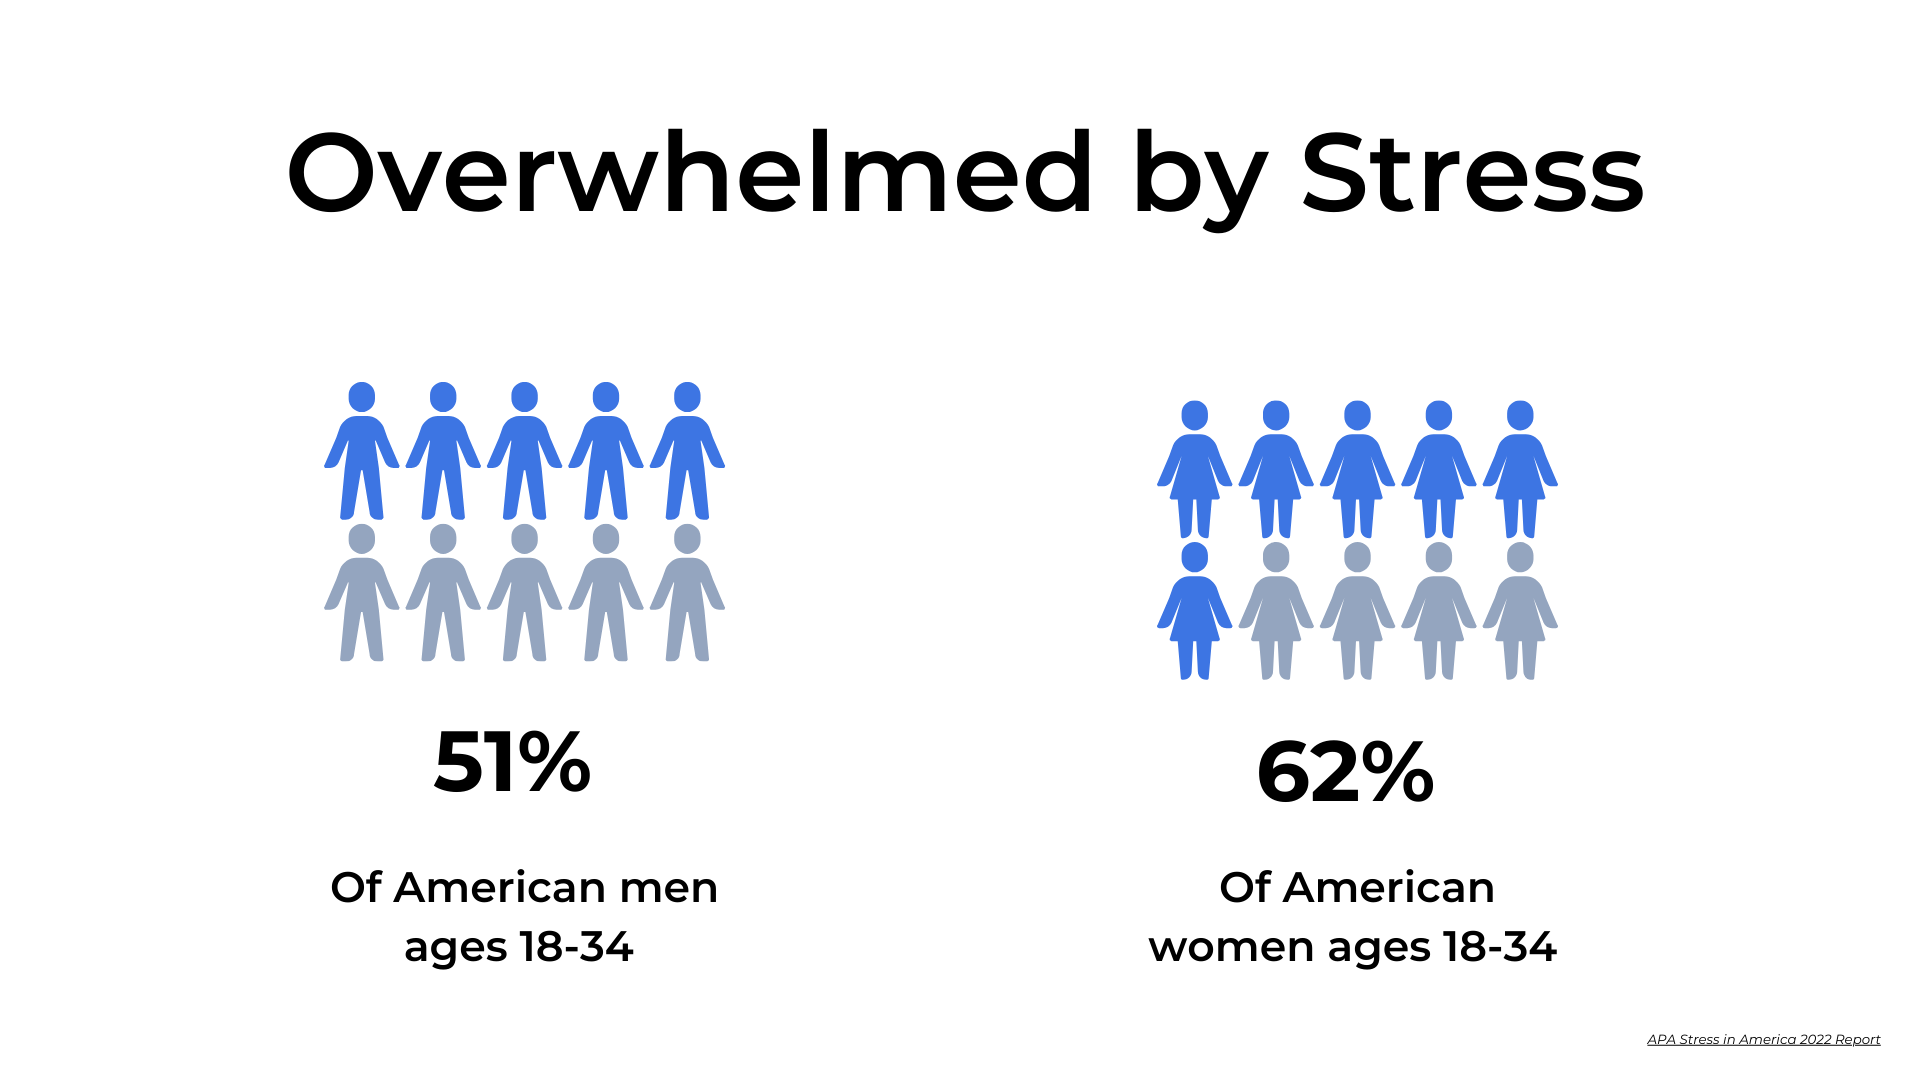 Overwhelmed by Stress: 51% of American men ages 18-34; 62% of American women ages 18-34